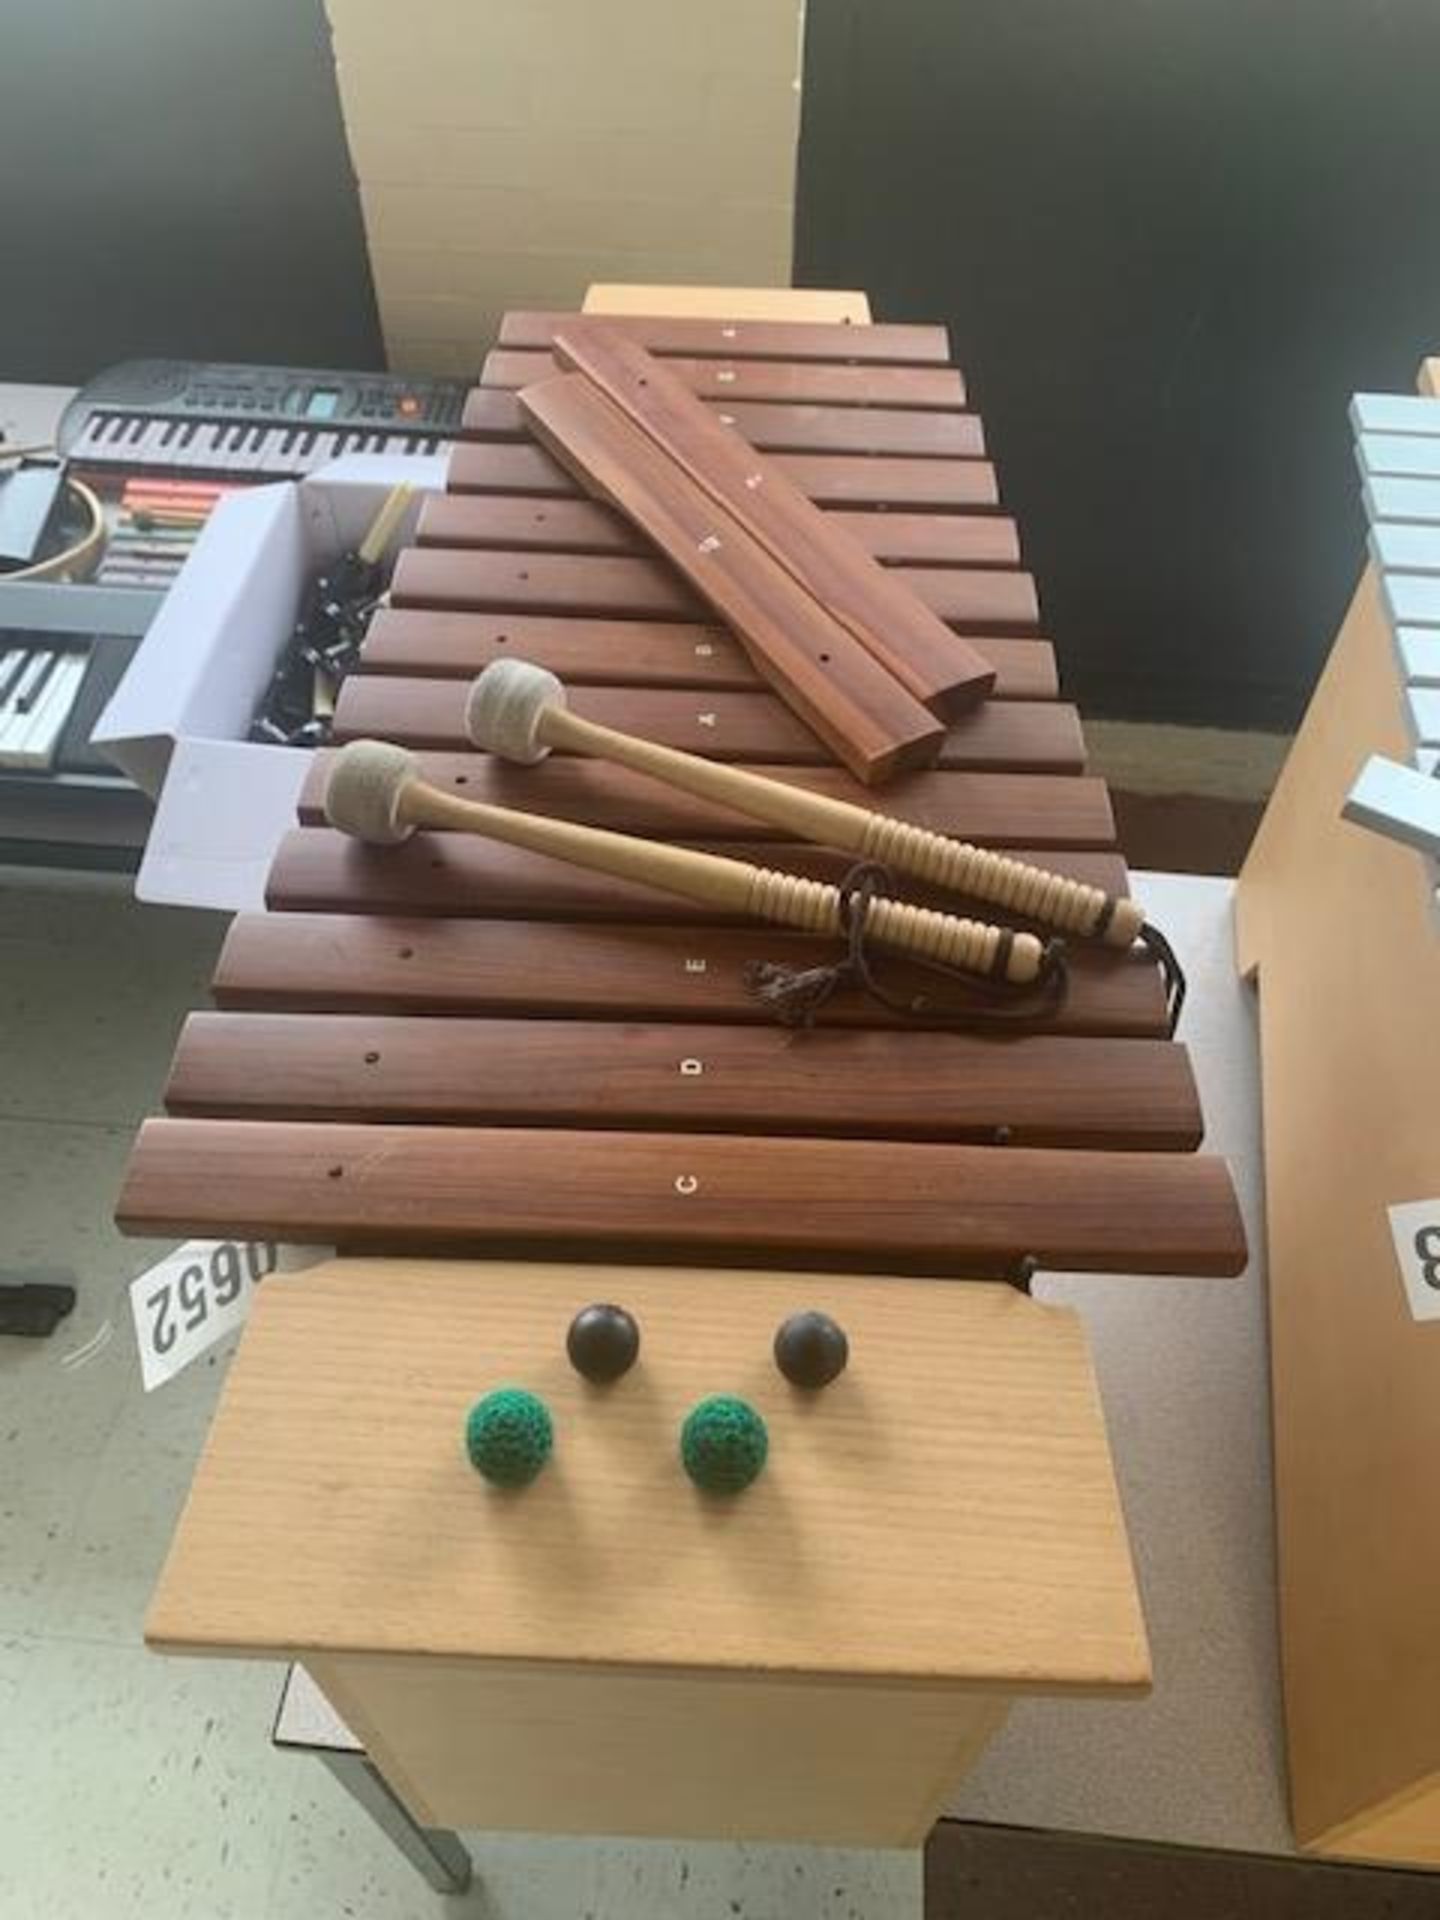 Emus Xylophone, Wood Base, Approx 12"Wx24"Lx24"H, w/Wood Bars. NOTE: Minor Separation of Plywood - Image 2 of 2